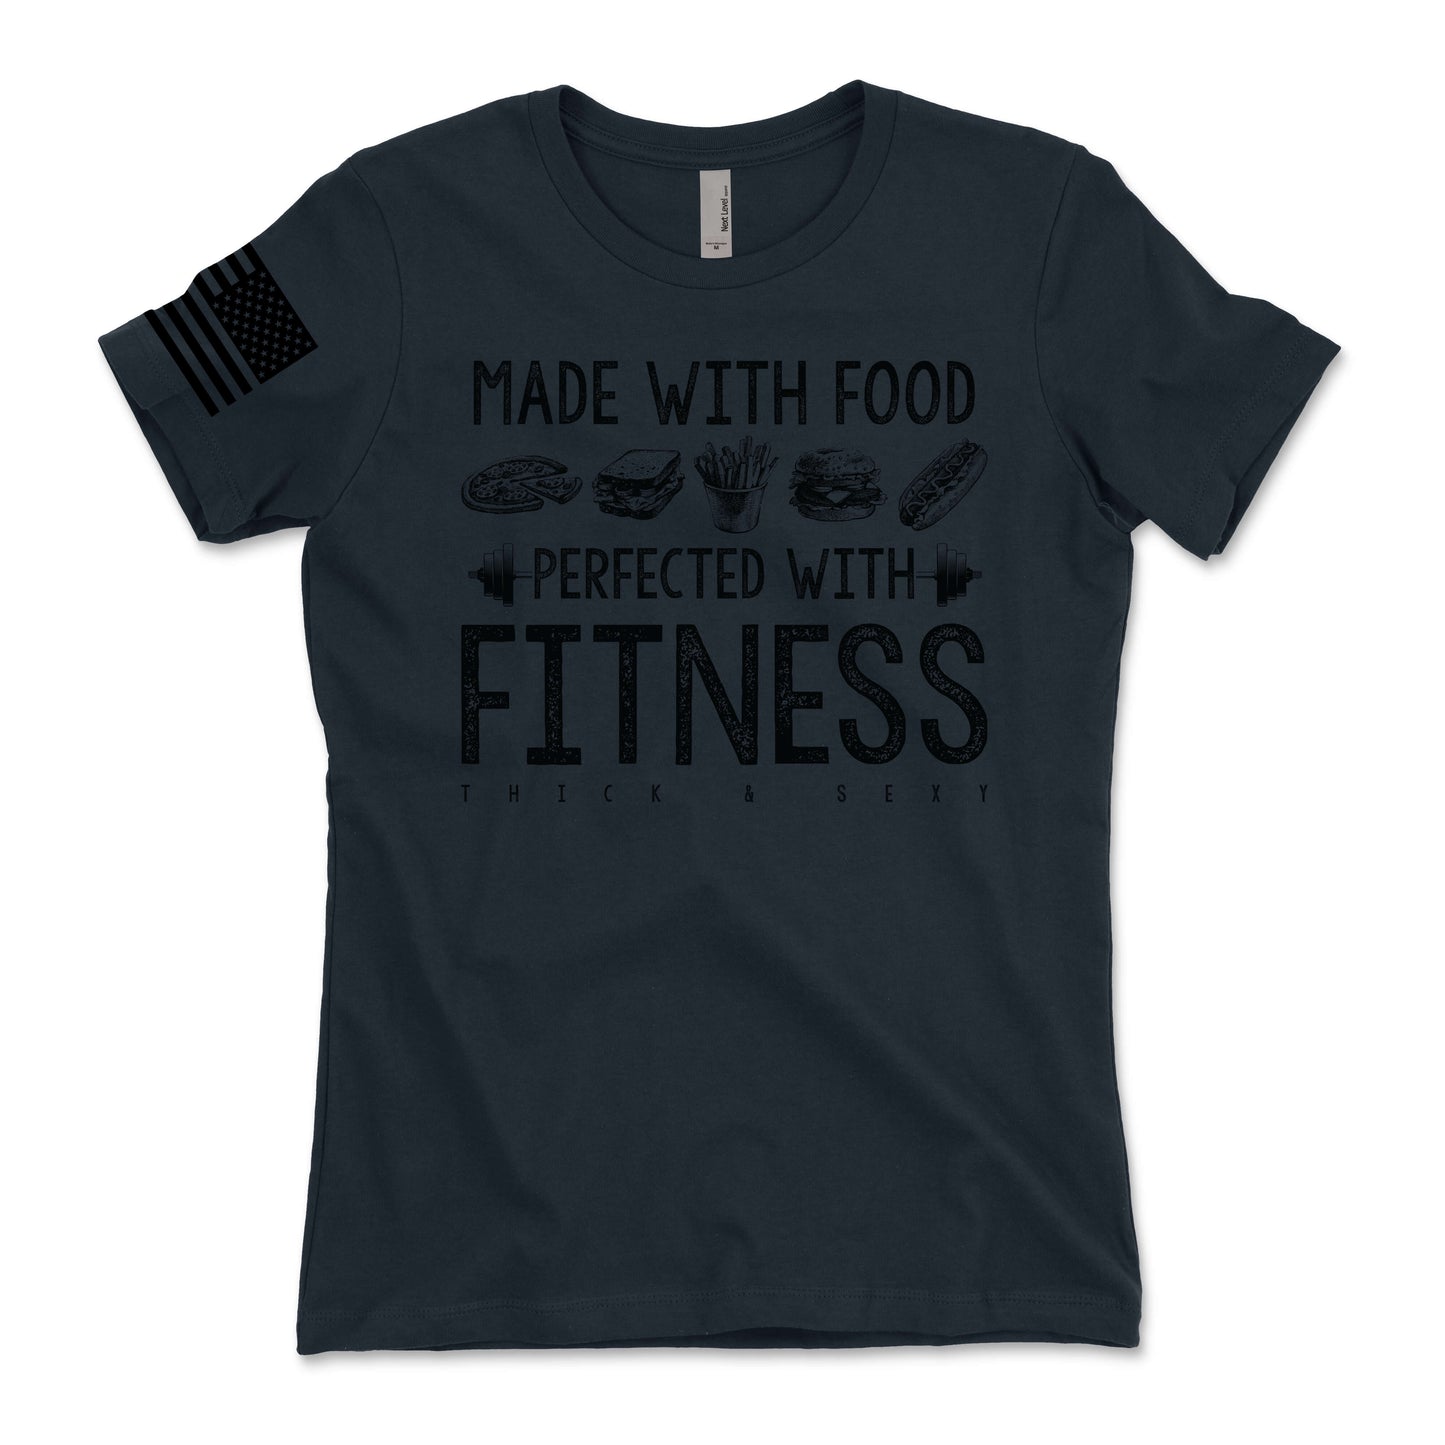 Made With Food Perfected With Fitness Women's T-Shirt